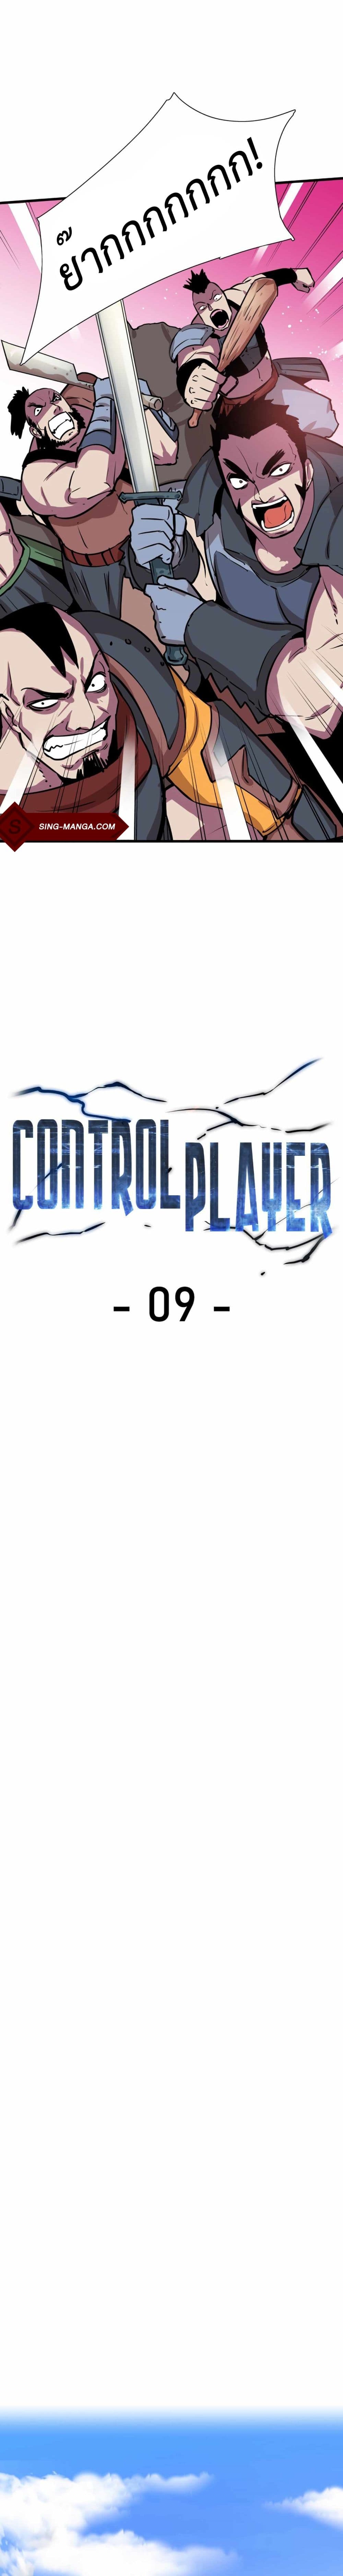 Control Player 9-9